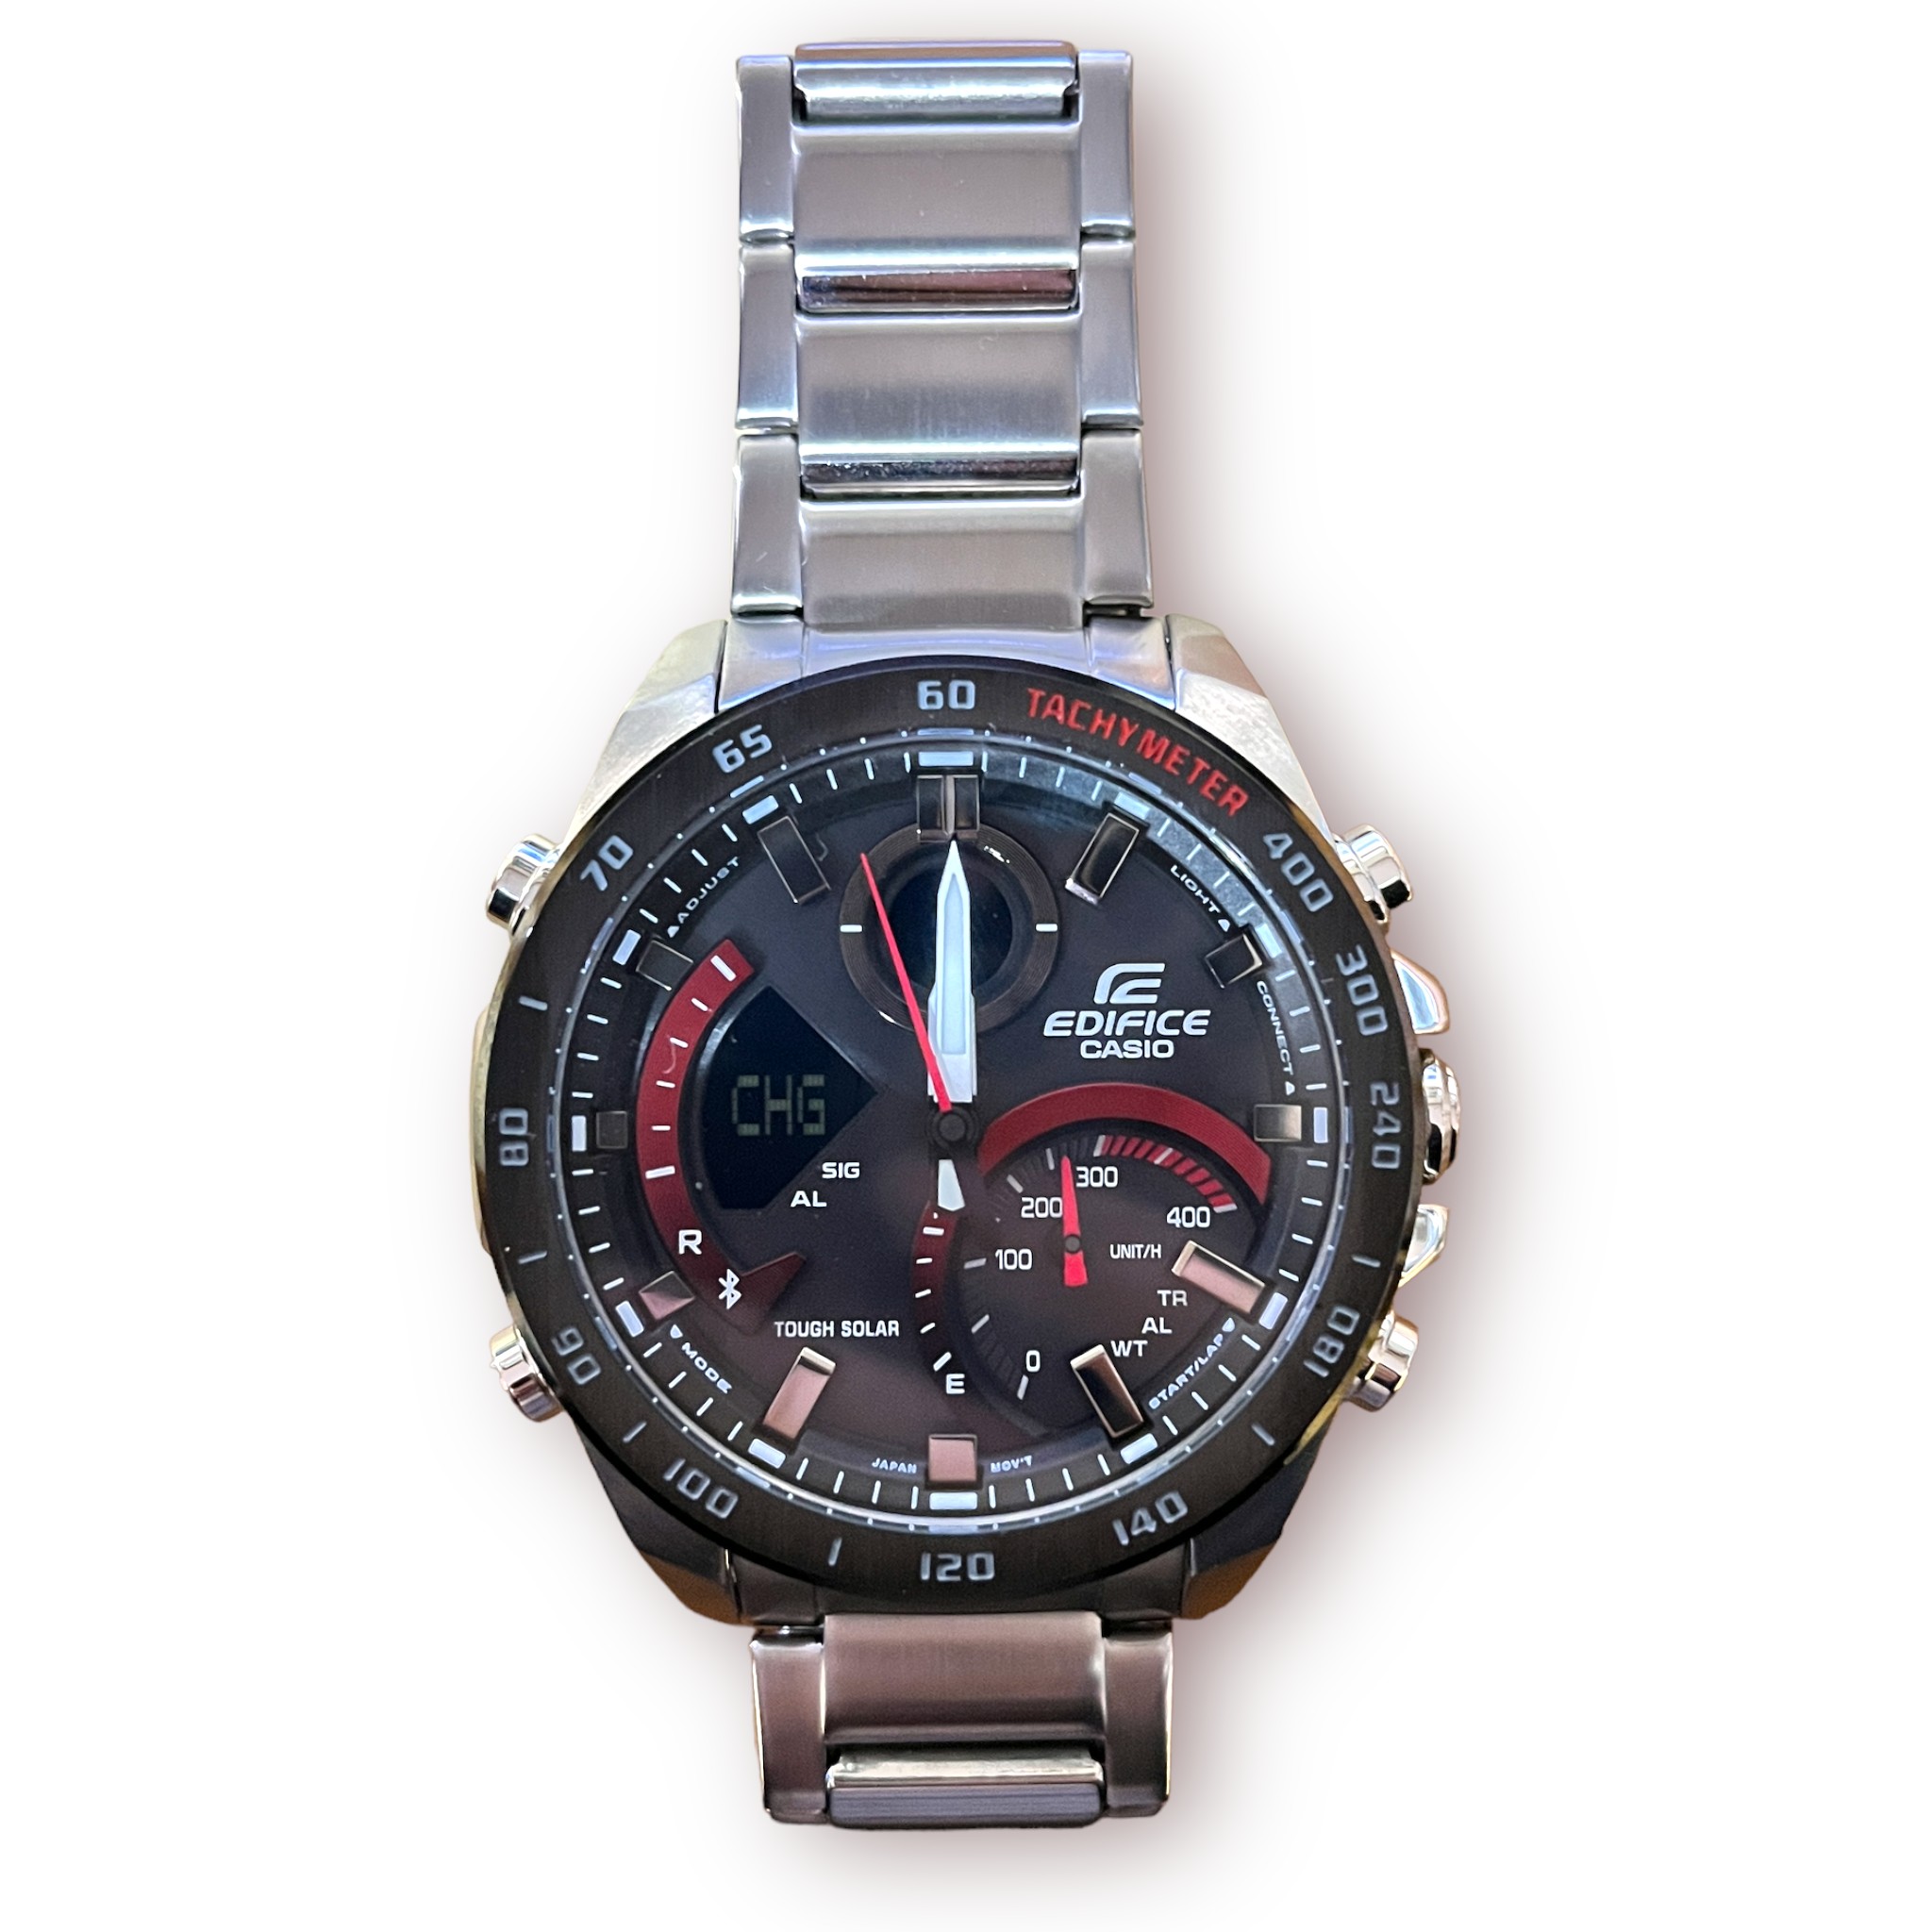 Two gents stainless steel Casio Edifice wristwatches, each with black dial, batons denoting hours, - Image 5 of 6